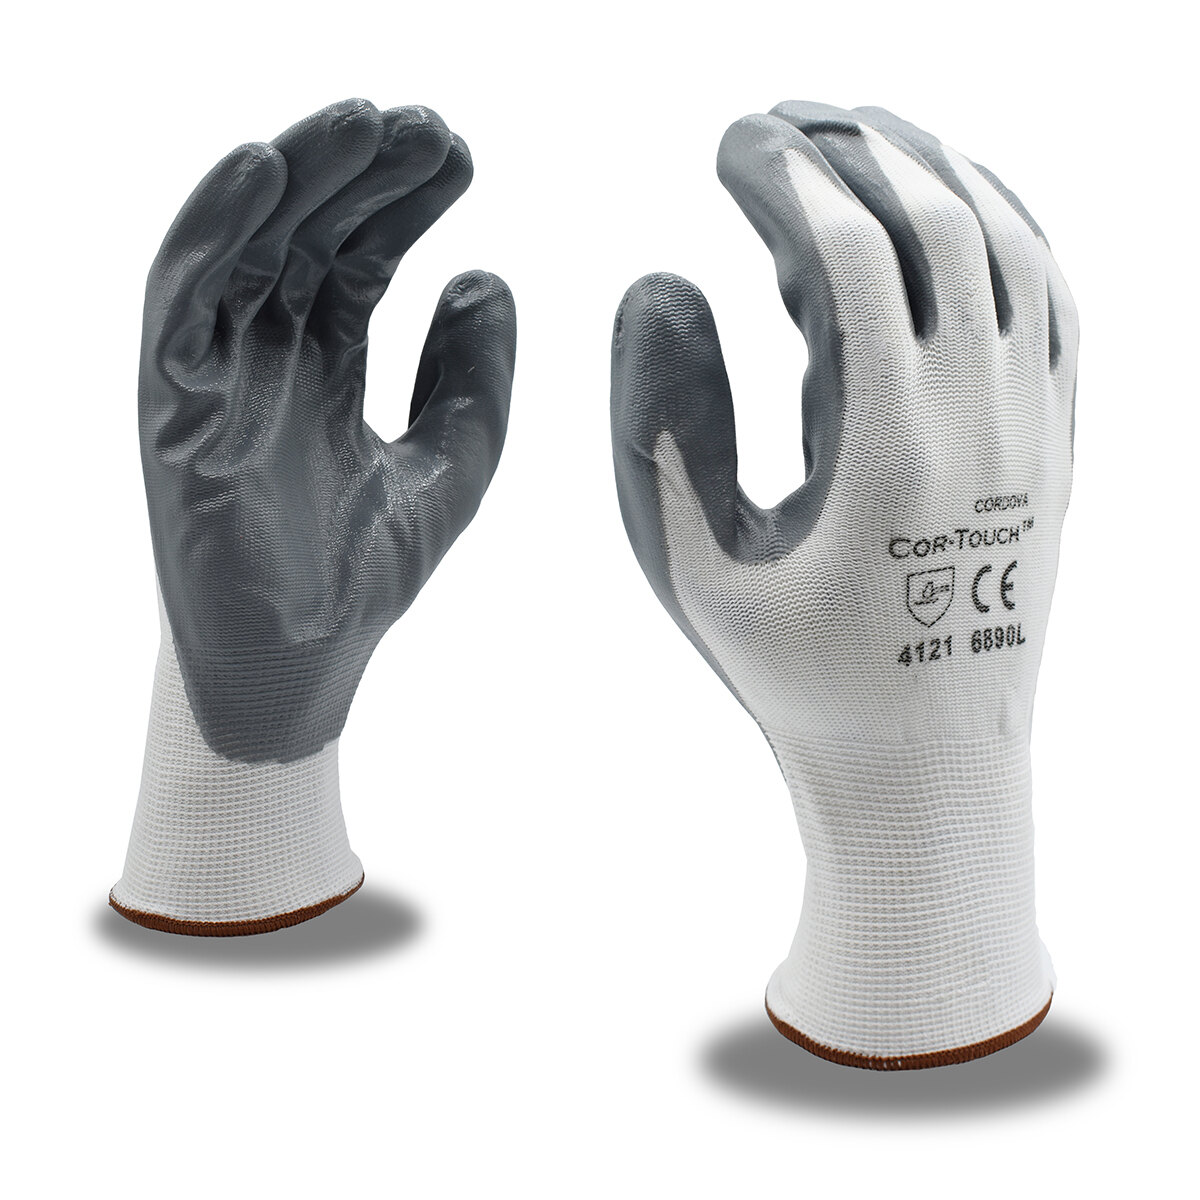 Cordova 6890 Cor-Touch™ 13-Gauge Flat Nitrile Palm Coated Gloves